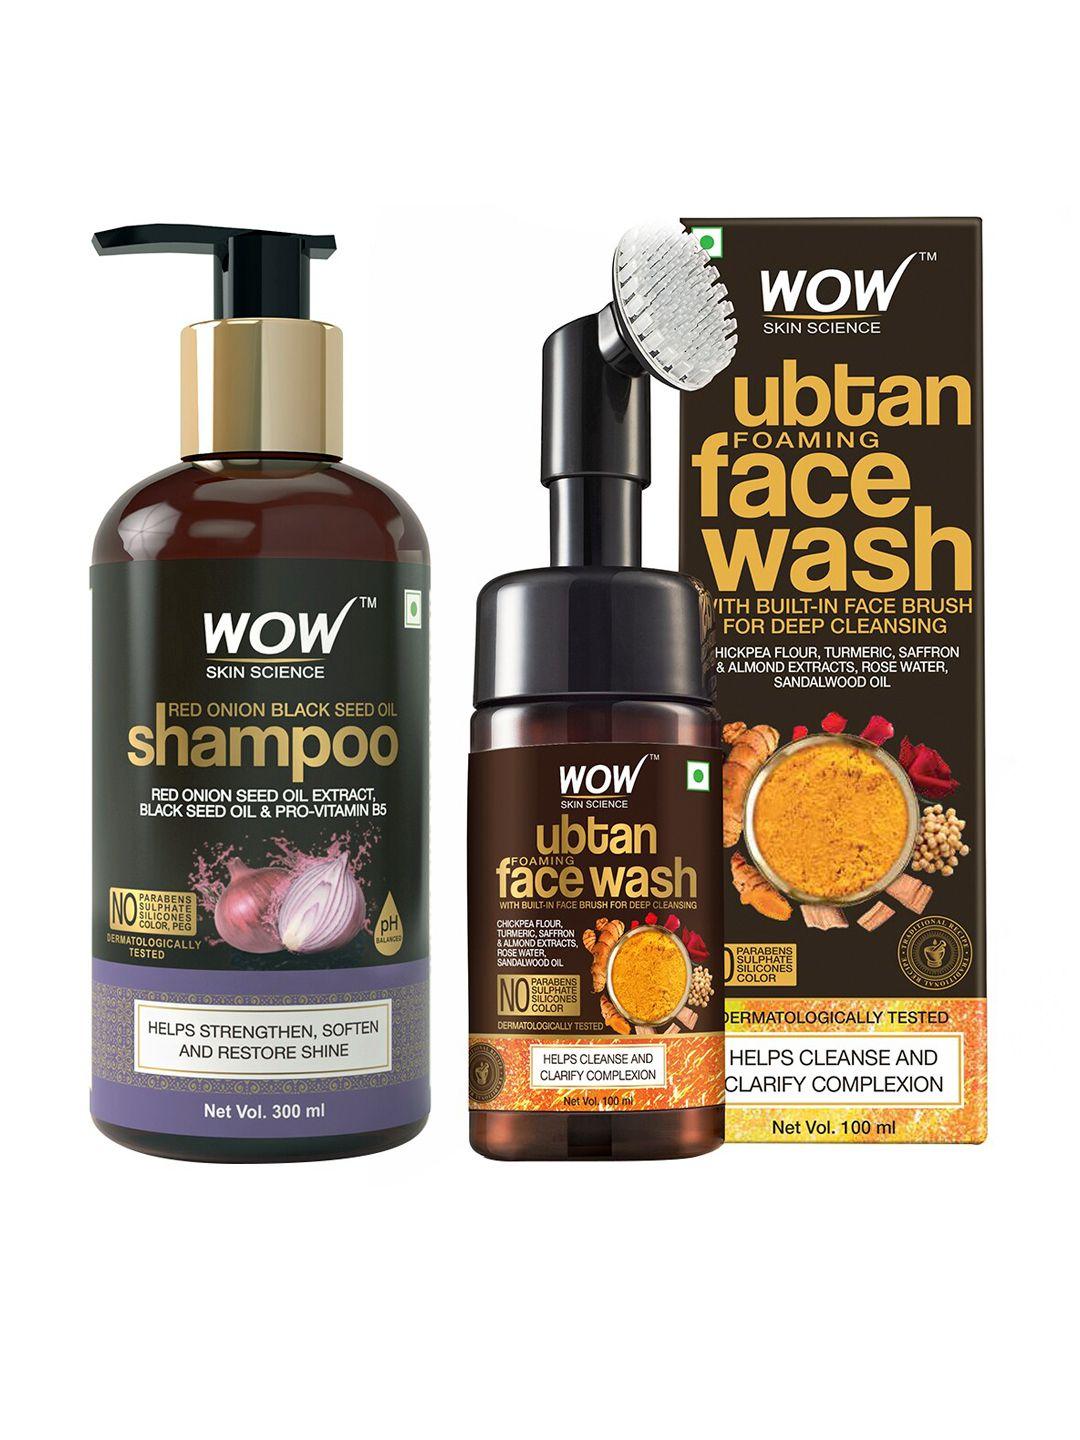 wow skin science set of shampoo & face wash